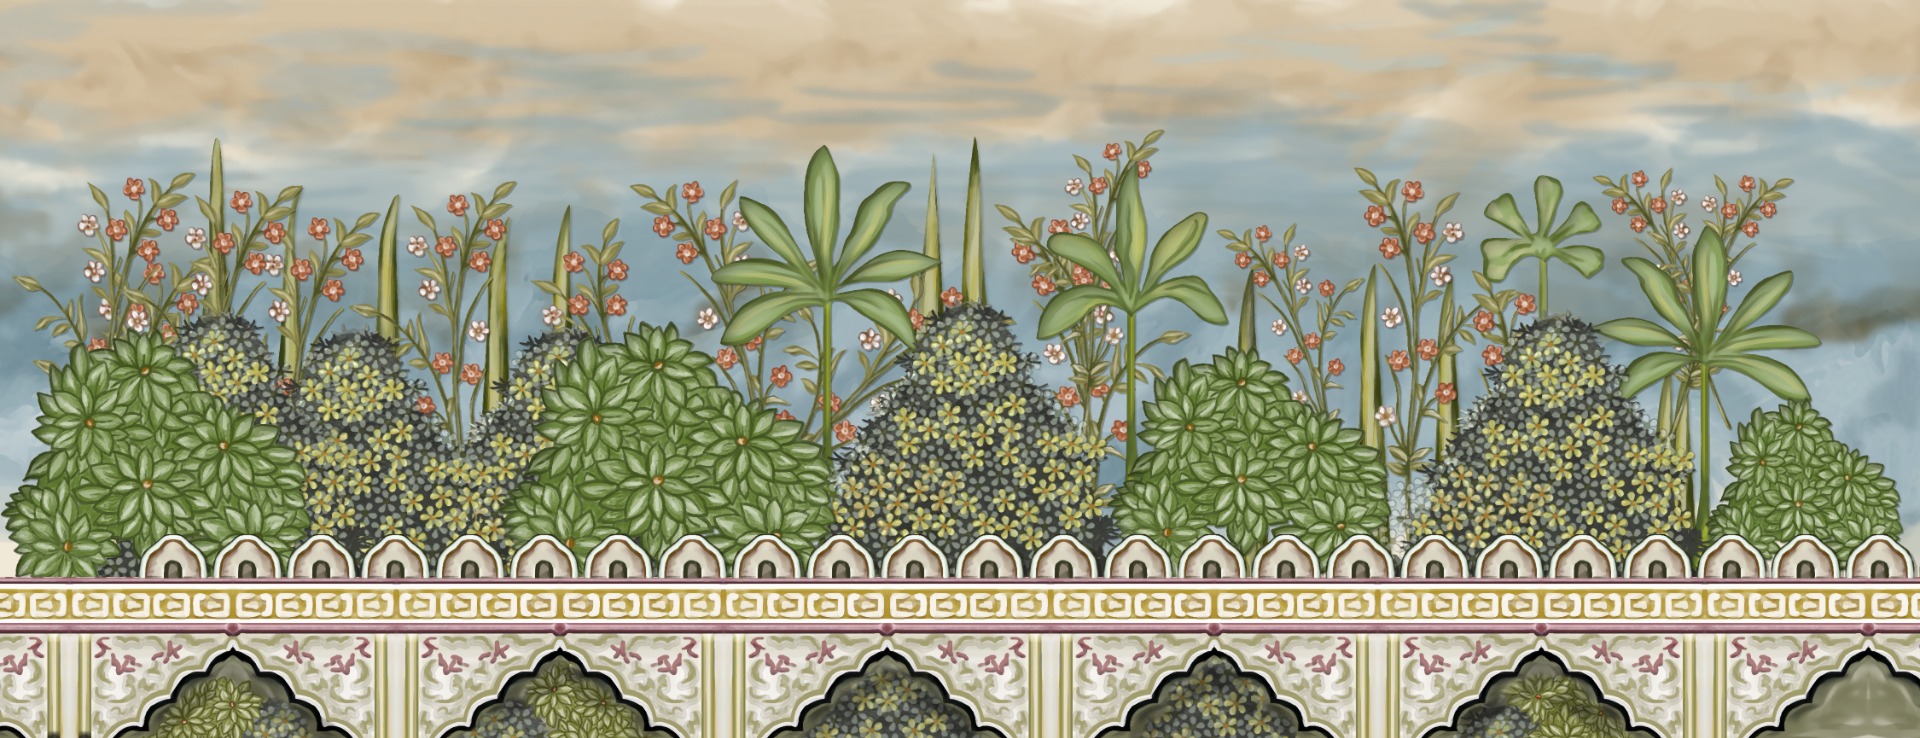 Mughal Fabric Wallpaper and Home Decor  Spoonflower